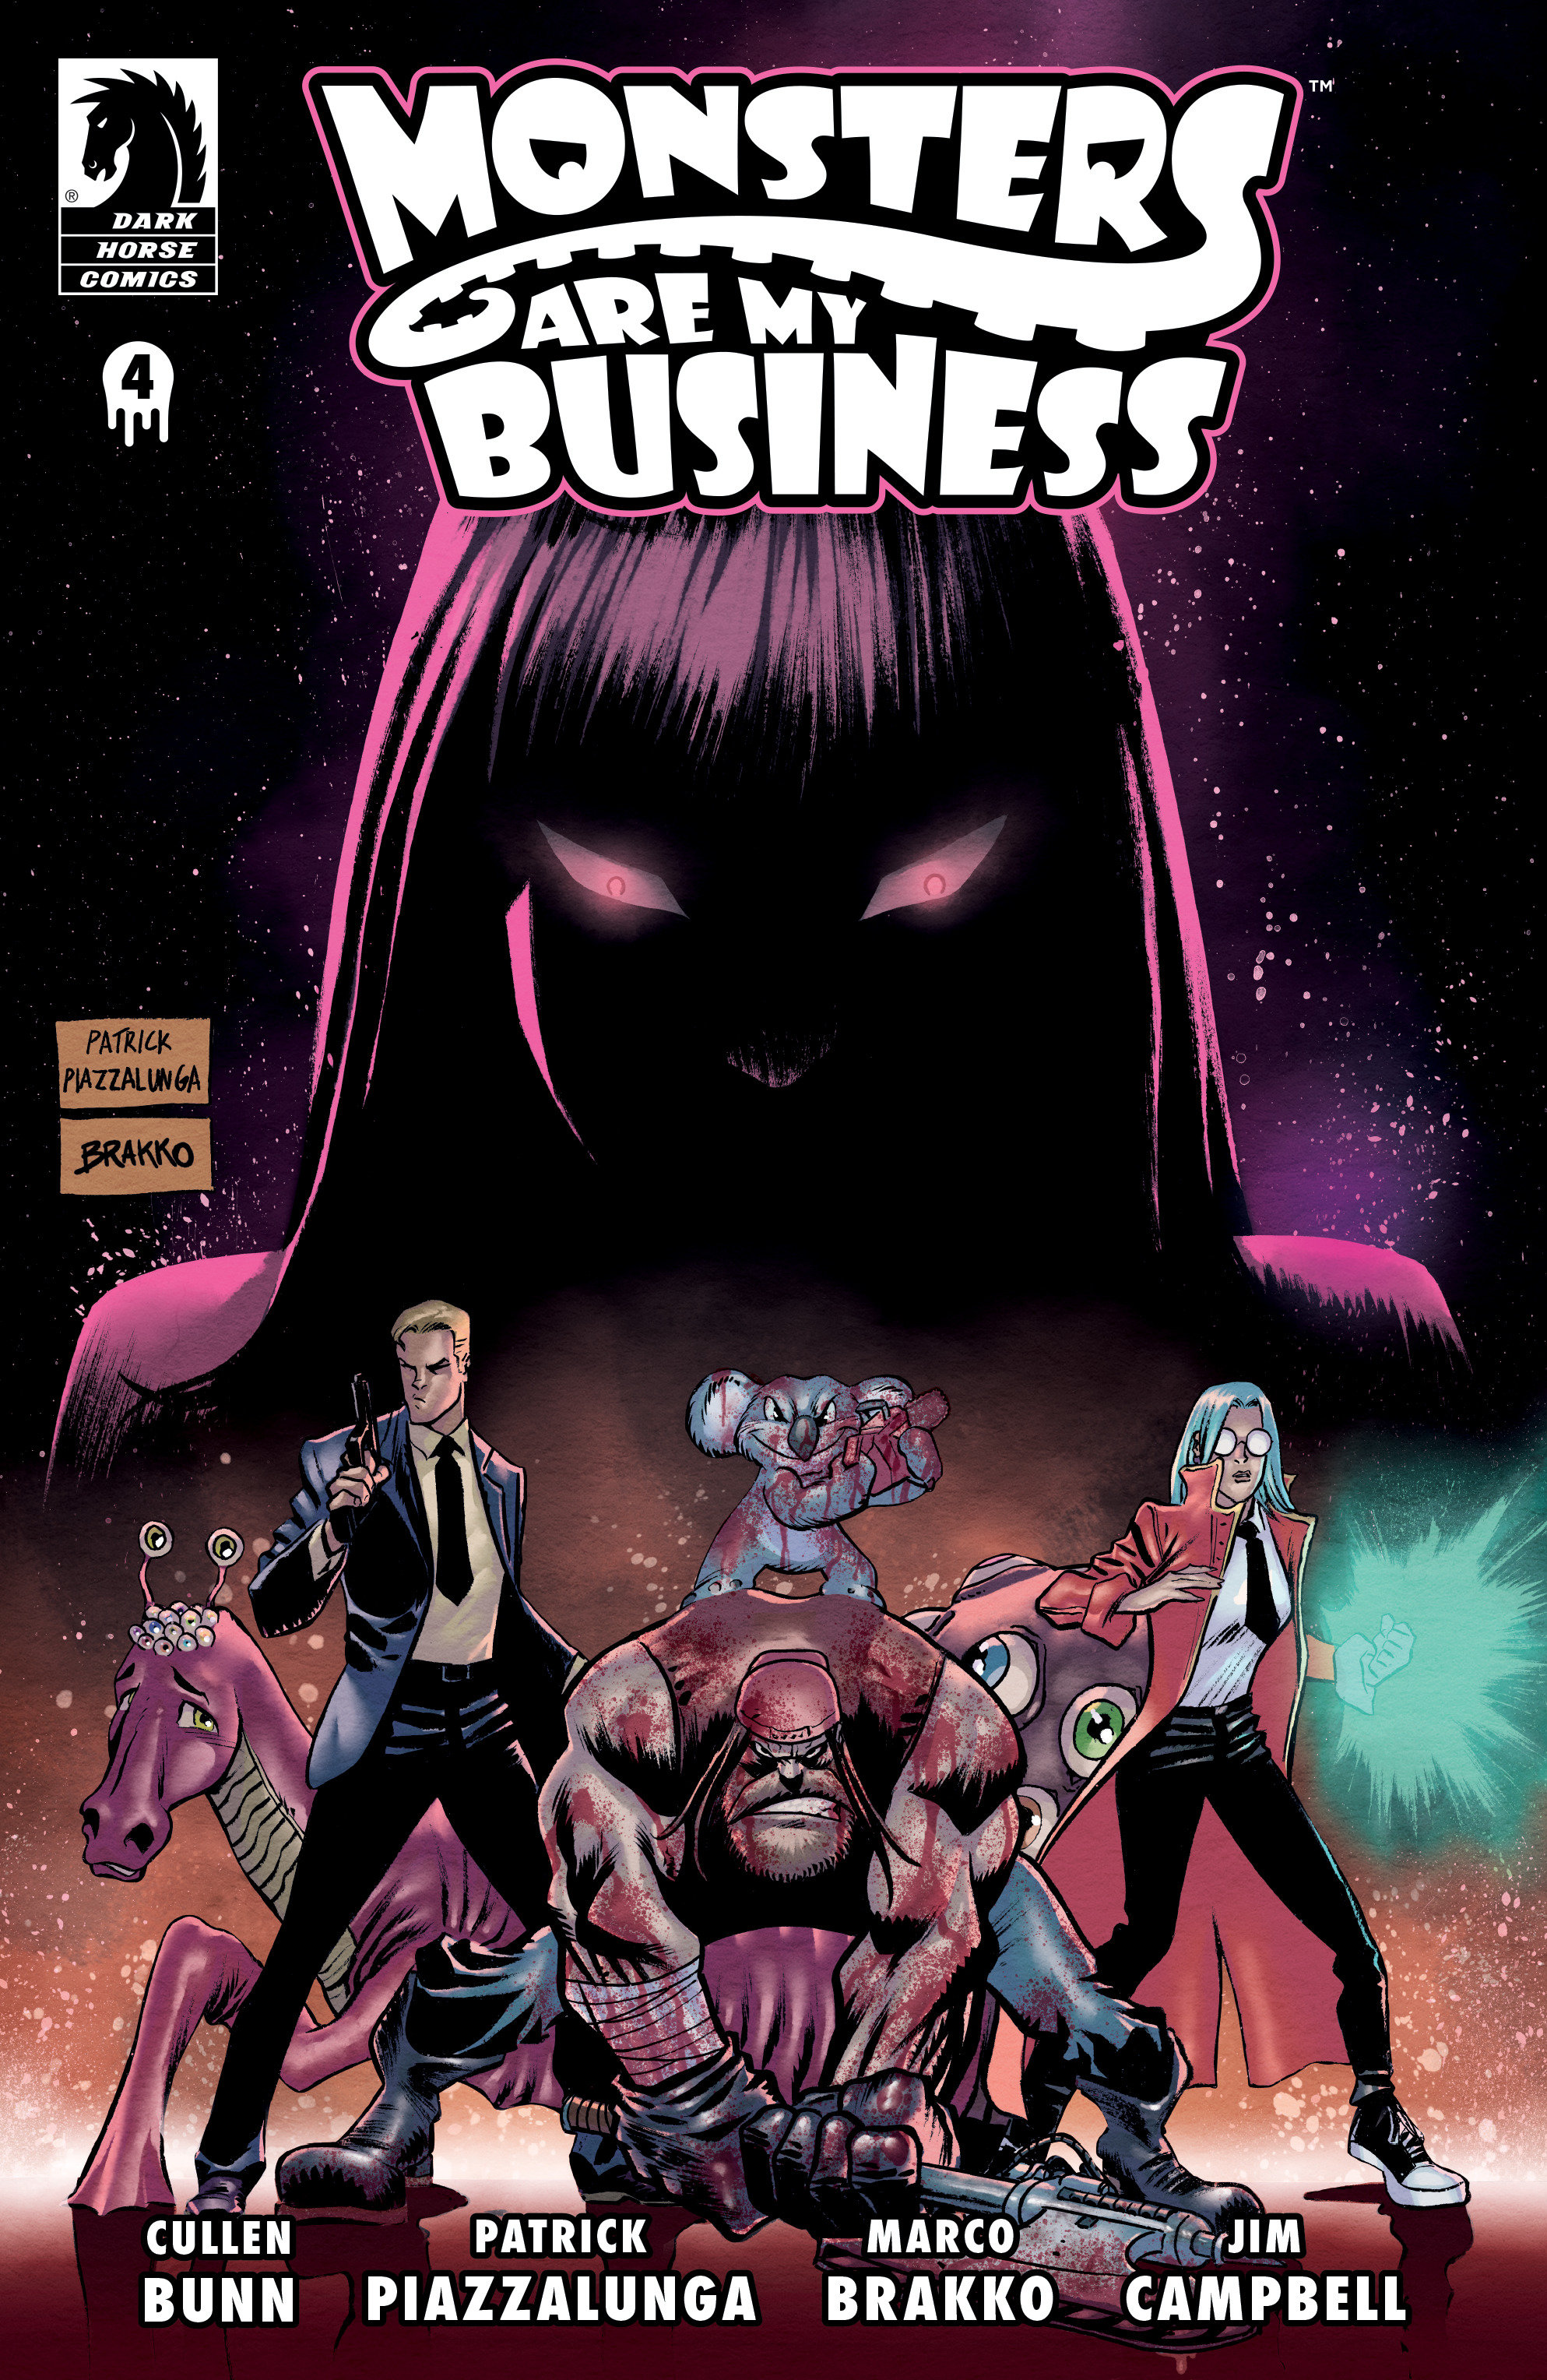 Monsters are My Business & Business is Bloody #4 Cover A (Patrick Piazzalunga)